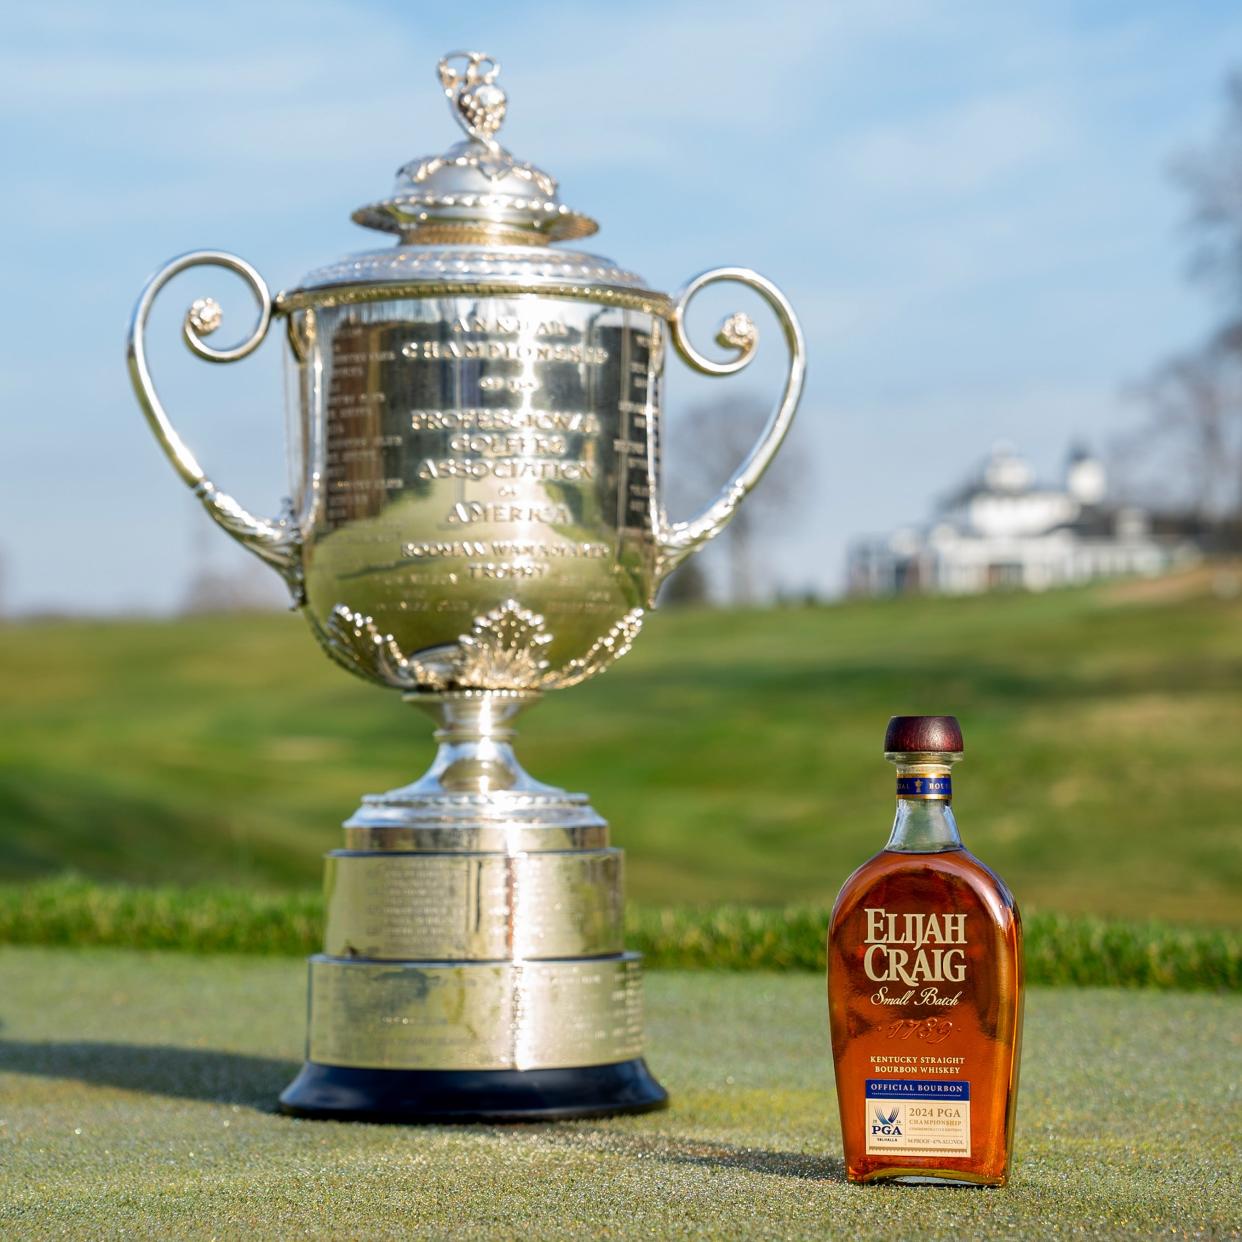 Elijah Craig, the Official Bourbon Supplier, will present the “Elijah Craig Bourbon Speakeasy” on the course for spectators to enjoy and will release a special Commemorative Edition of its Elijah Craig Small Batch in honor of the 2024 PGA Championship.